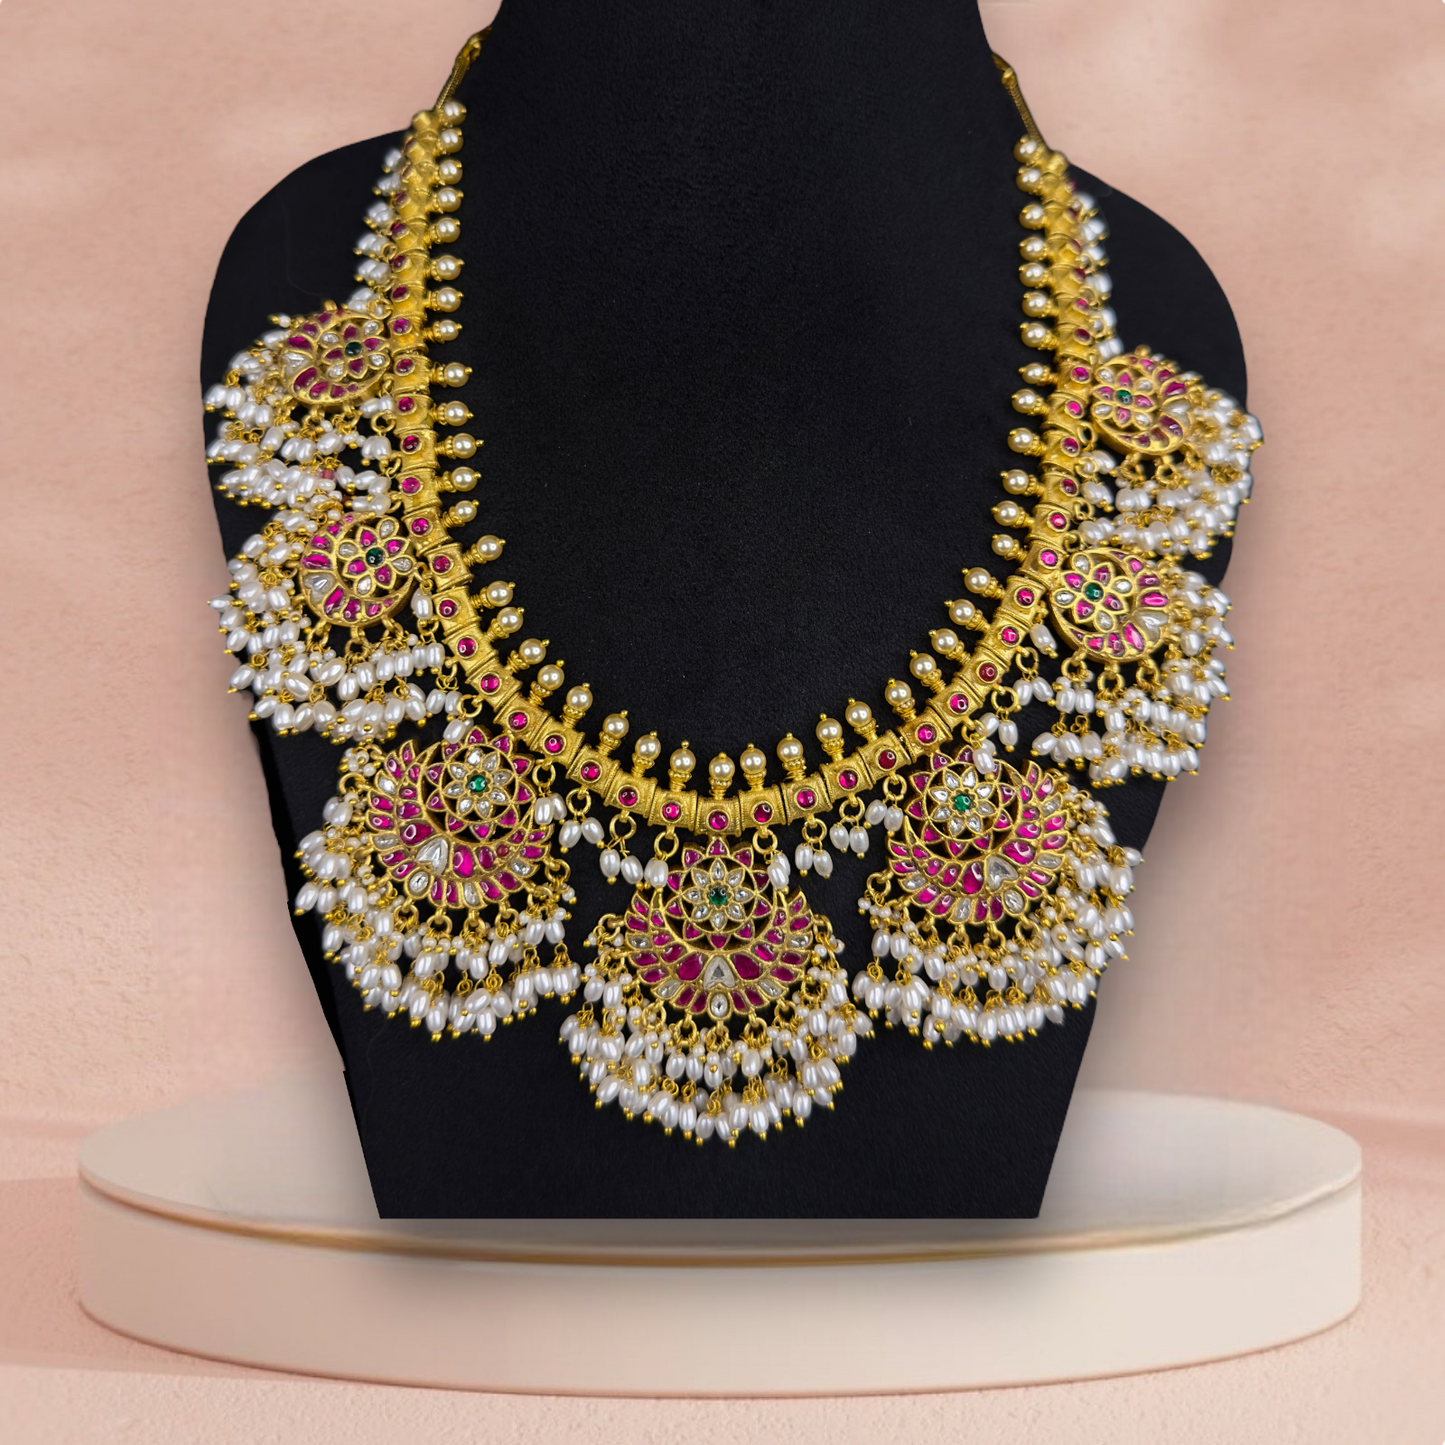 Opulent Guttapusulu Jadau Kundan Necklace with Pearl Tassels and Floral Accents with 22k gold platingThis product belongs to Jadau Kundan jewellery Category